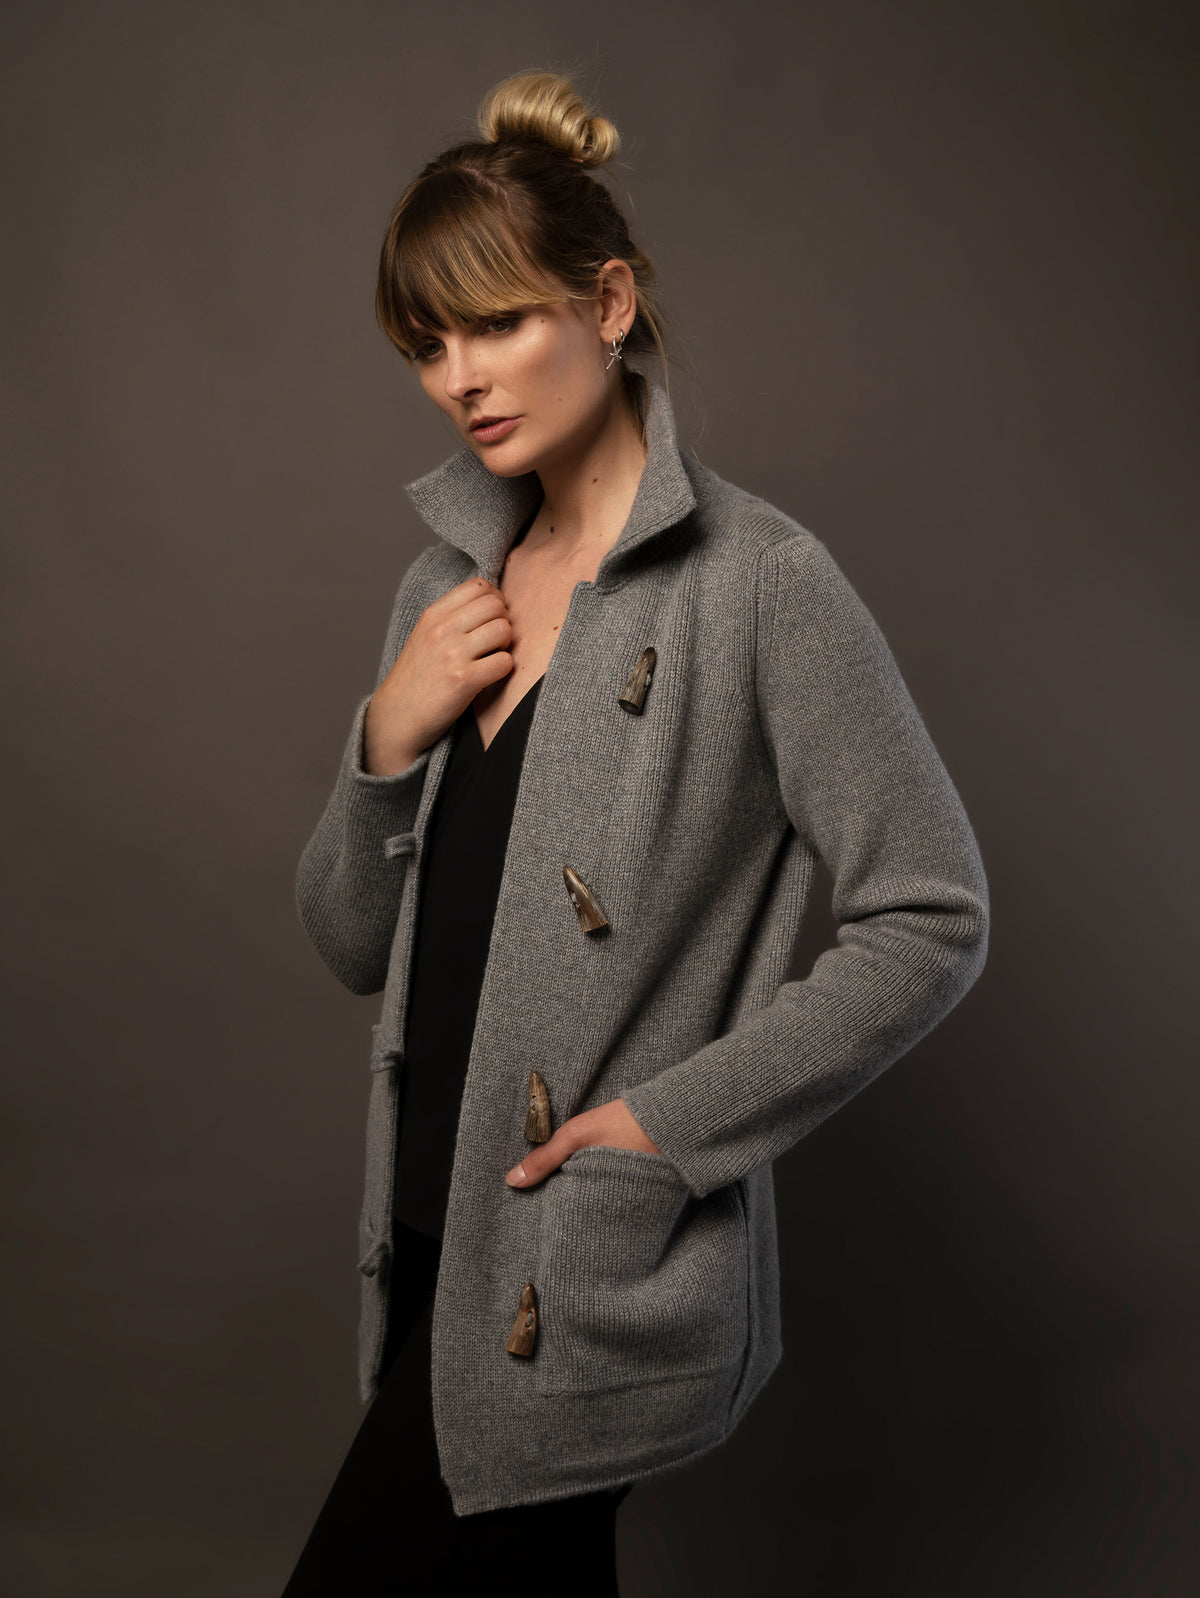 Ladies Cashmere Duffle Coat in Dark Grey. 100% cashmere handmade under the Royal Warrant in the UK. This is Cashmere at it&#39;s finest. 